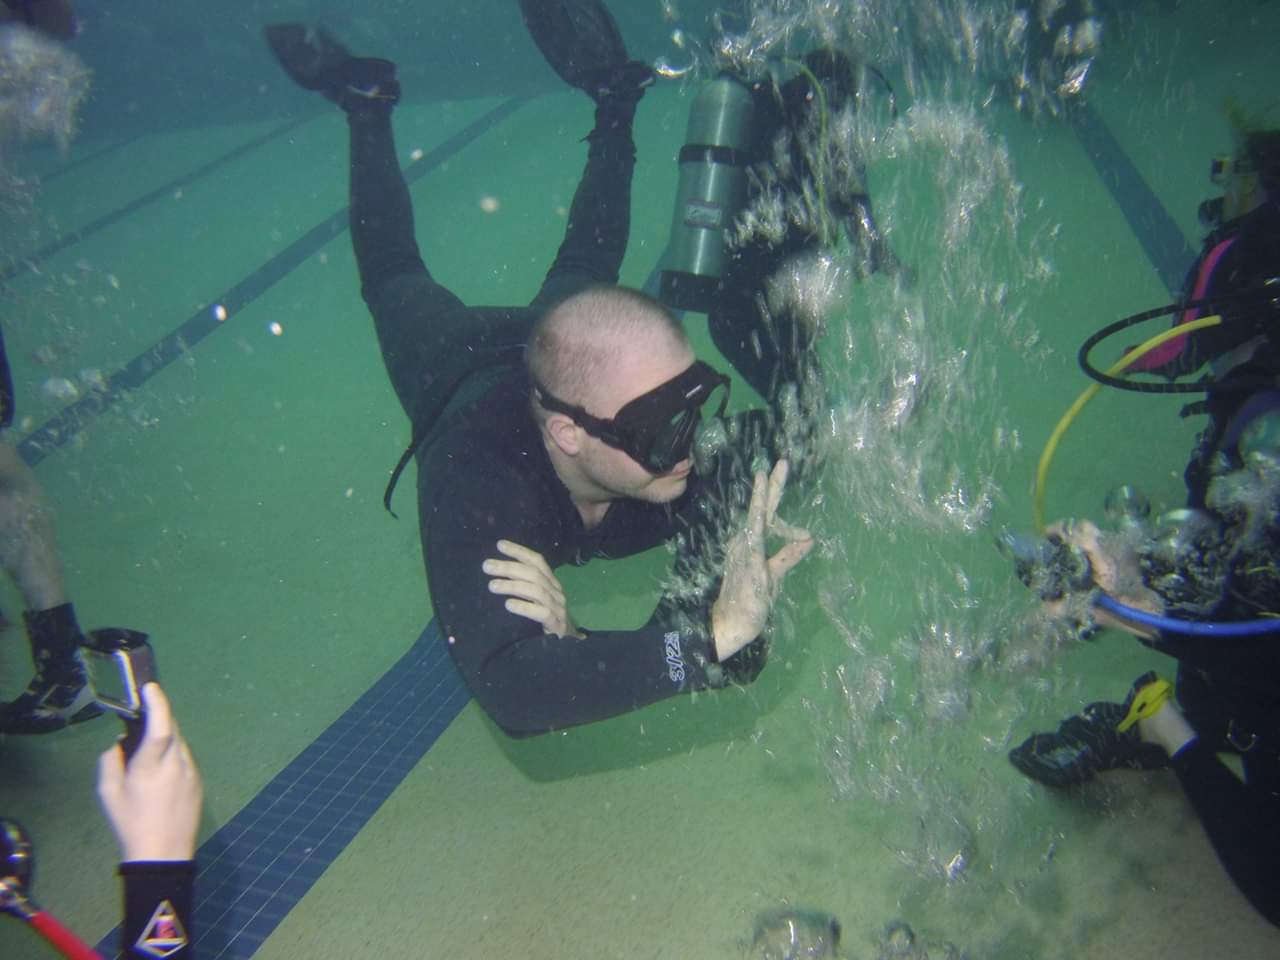 kyle-vandermolen-technical-scuba-diver-trained-in-the-use-of-rebreathers- Hydrogen Fluoride